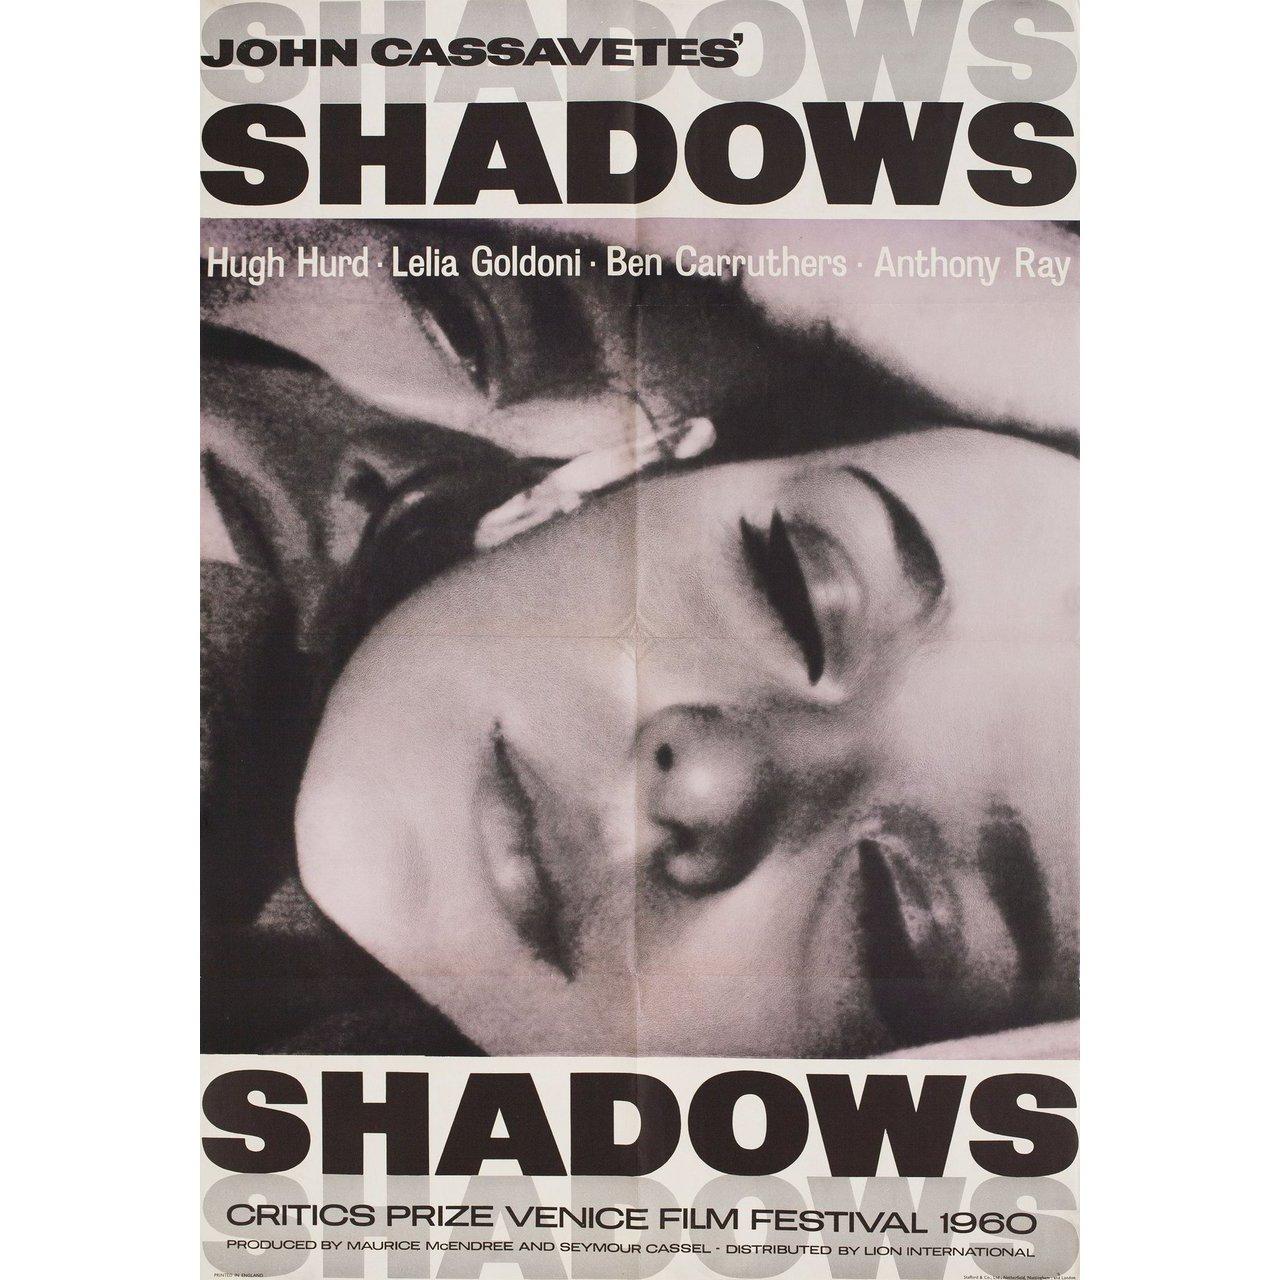 Original 1960 British one sheet poster for the film Shadows directed by John Cassavetes with Ben Carruthers / Lelia Goldoni / Hugh Hurd / Anthony Ray. Fine condition, folded. Many original posters were issued folded or were subsequently folded.